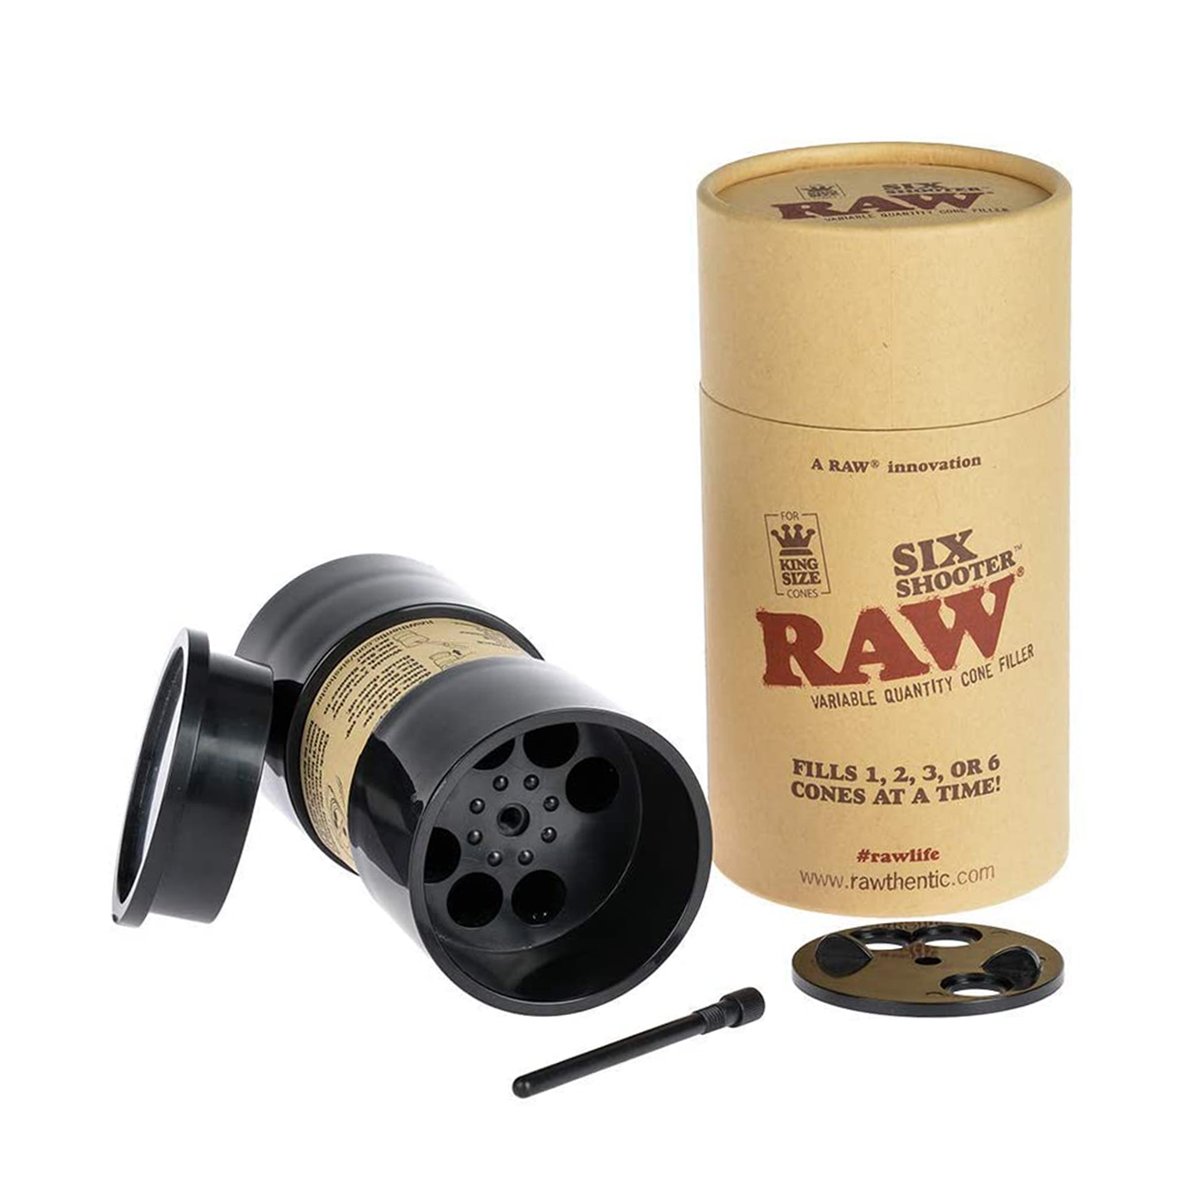 RAW | King Size Cone Loader Filling Device Six Shooter - 1